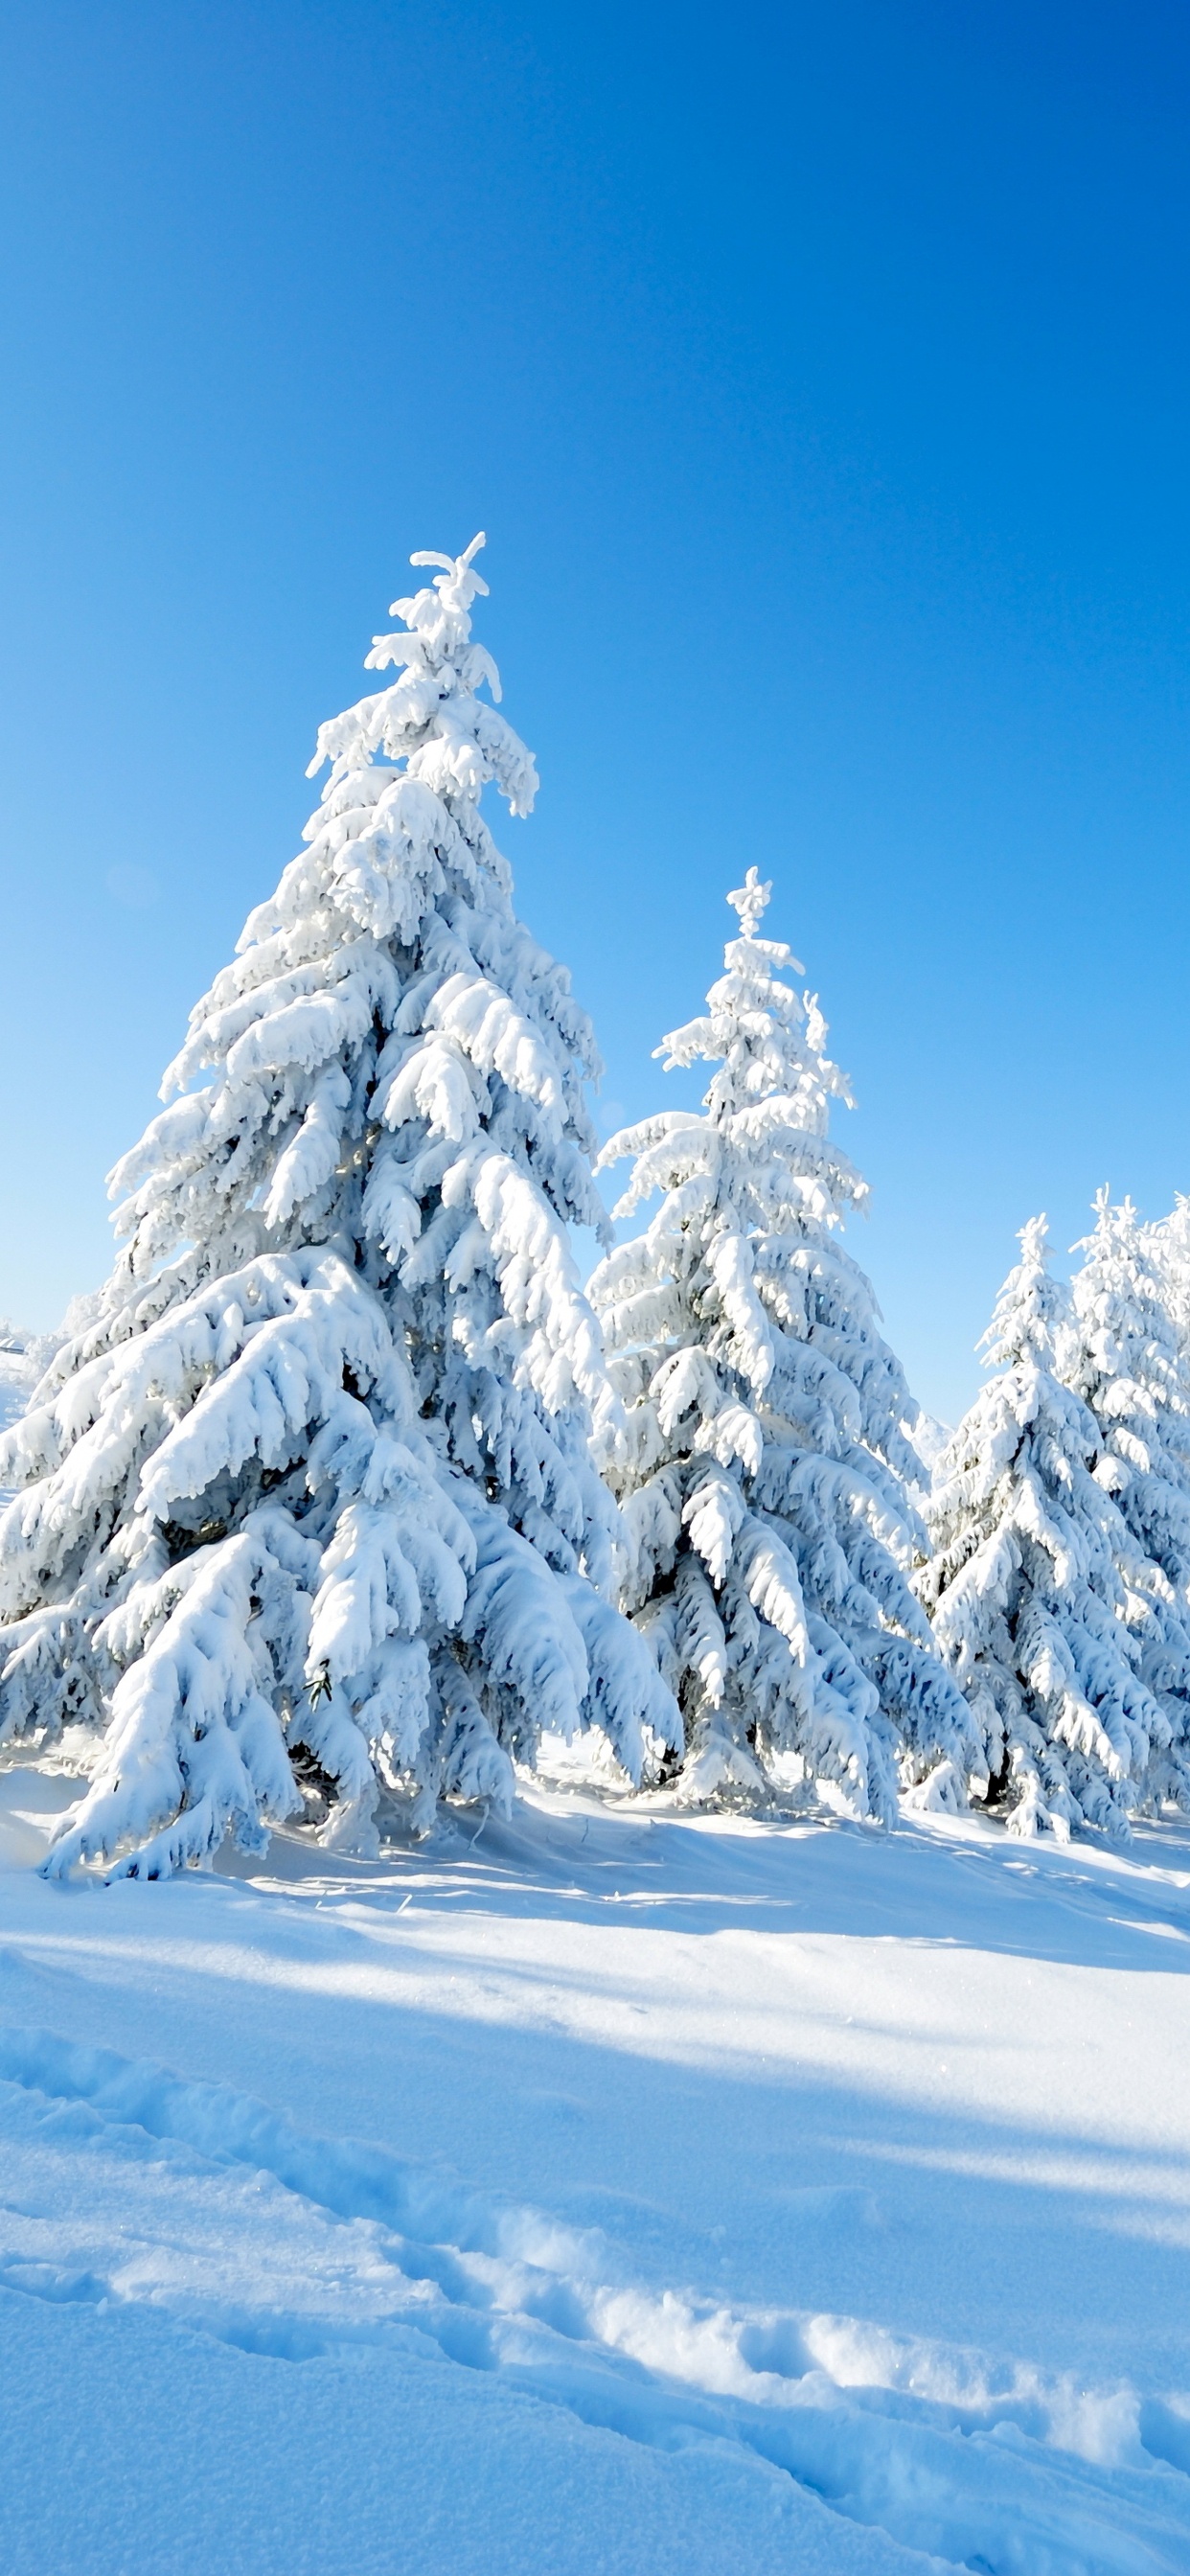 Snow Covered Pine Trees on Snow Covered Ground Under Blue Sky During Daytime. Wallpaper in 1242x2688 Resolution